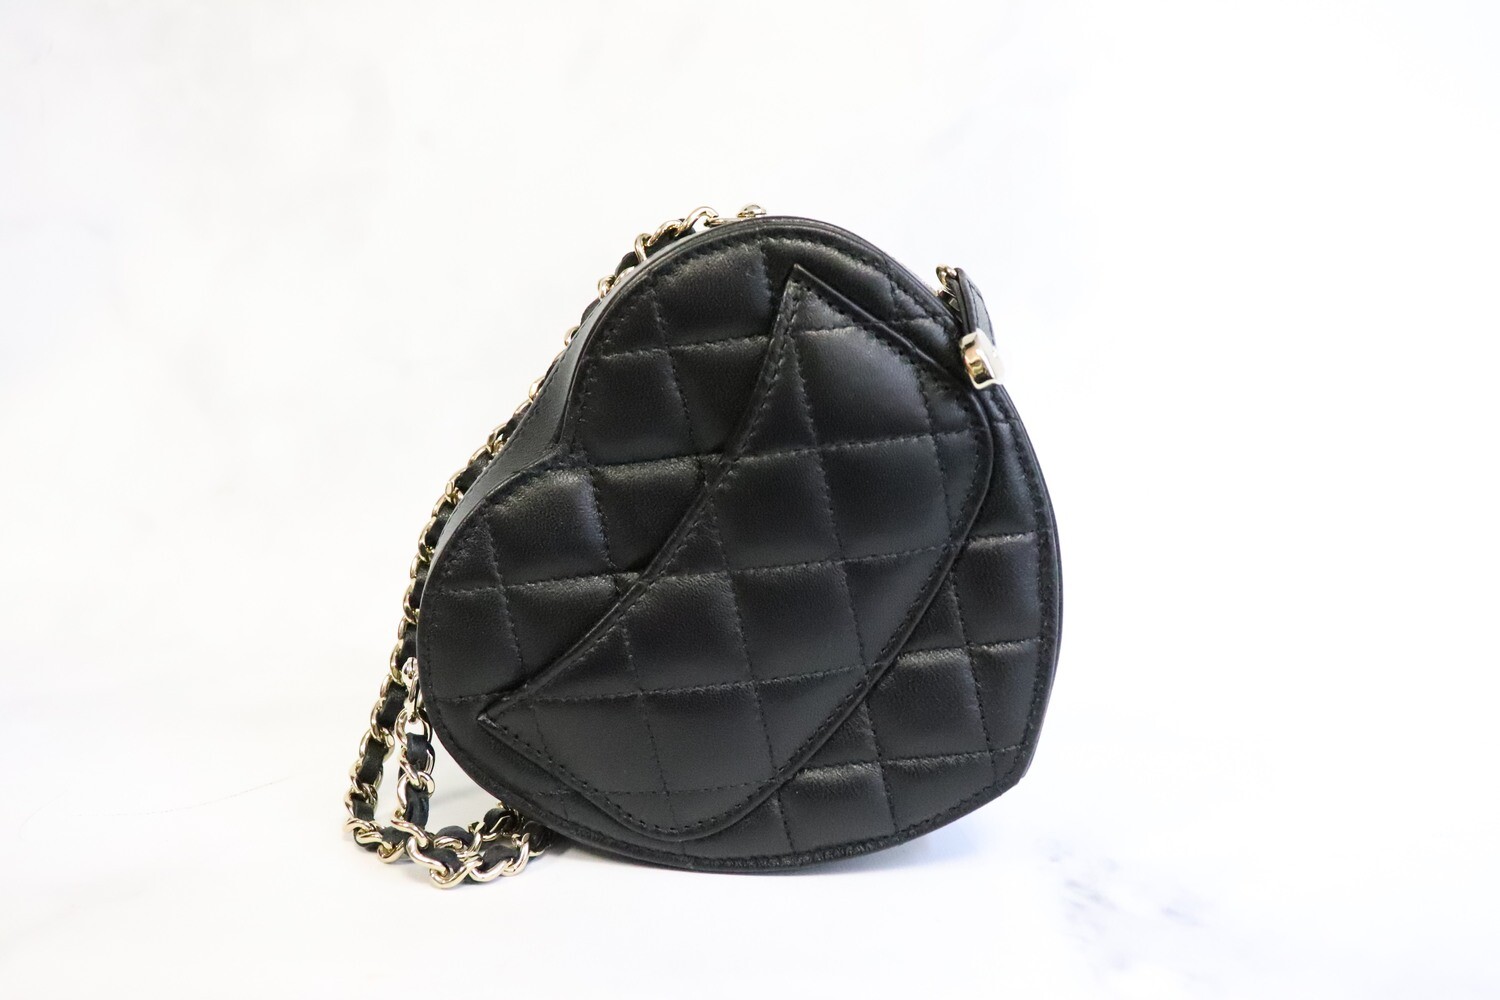 Chanel Heart Bag, Clutch on Chain, Black Lambskin Leather, Gold Hardware, New